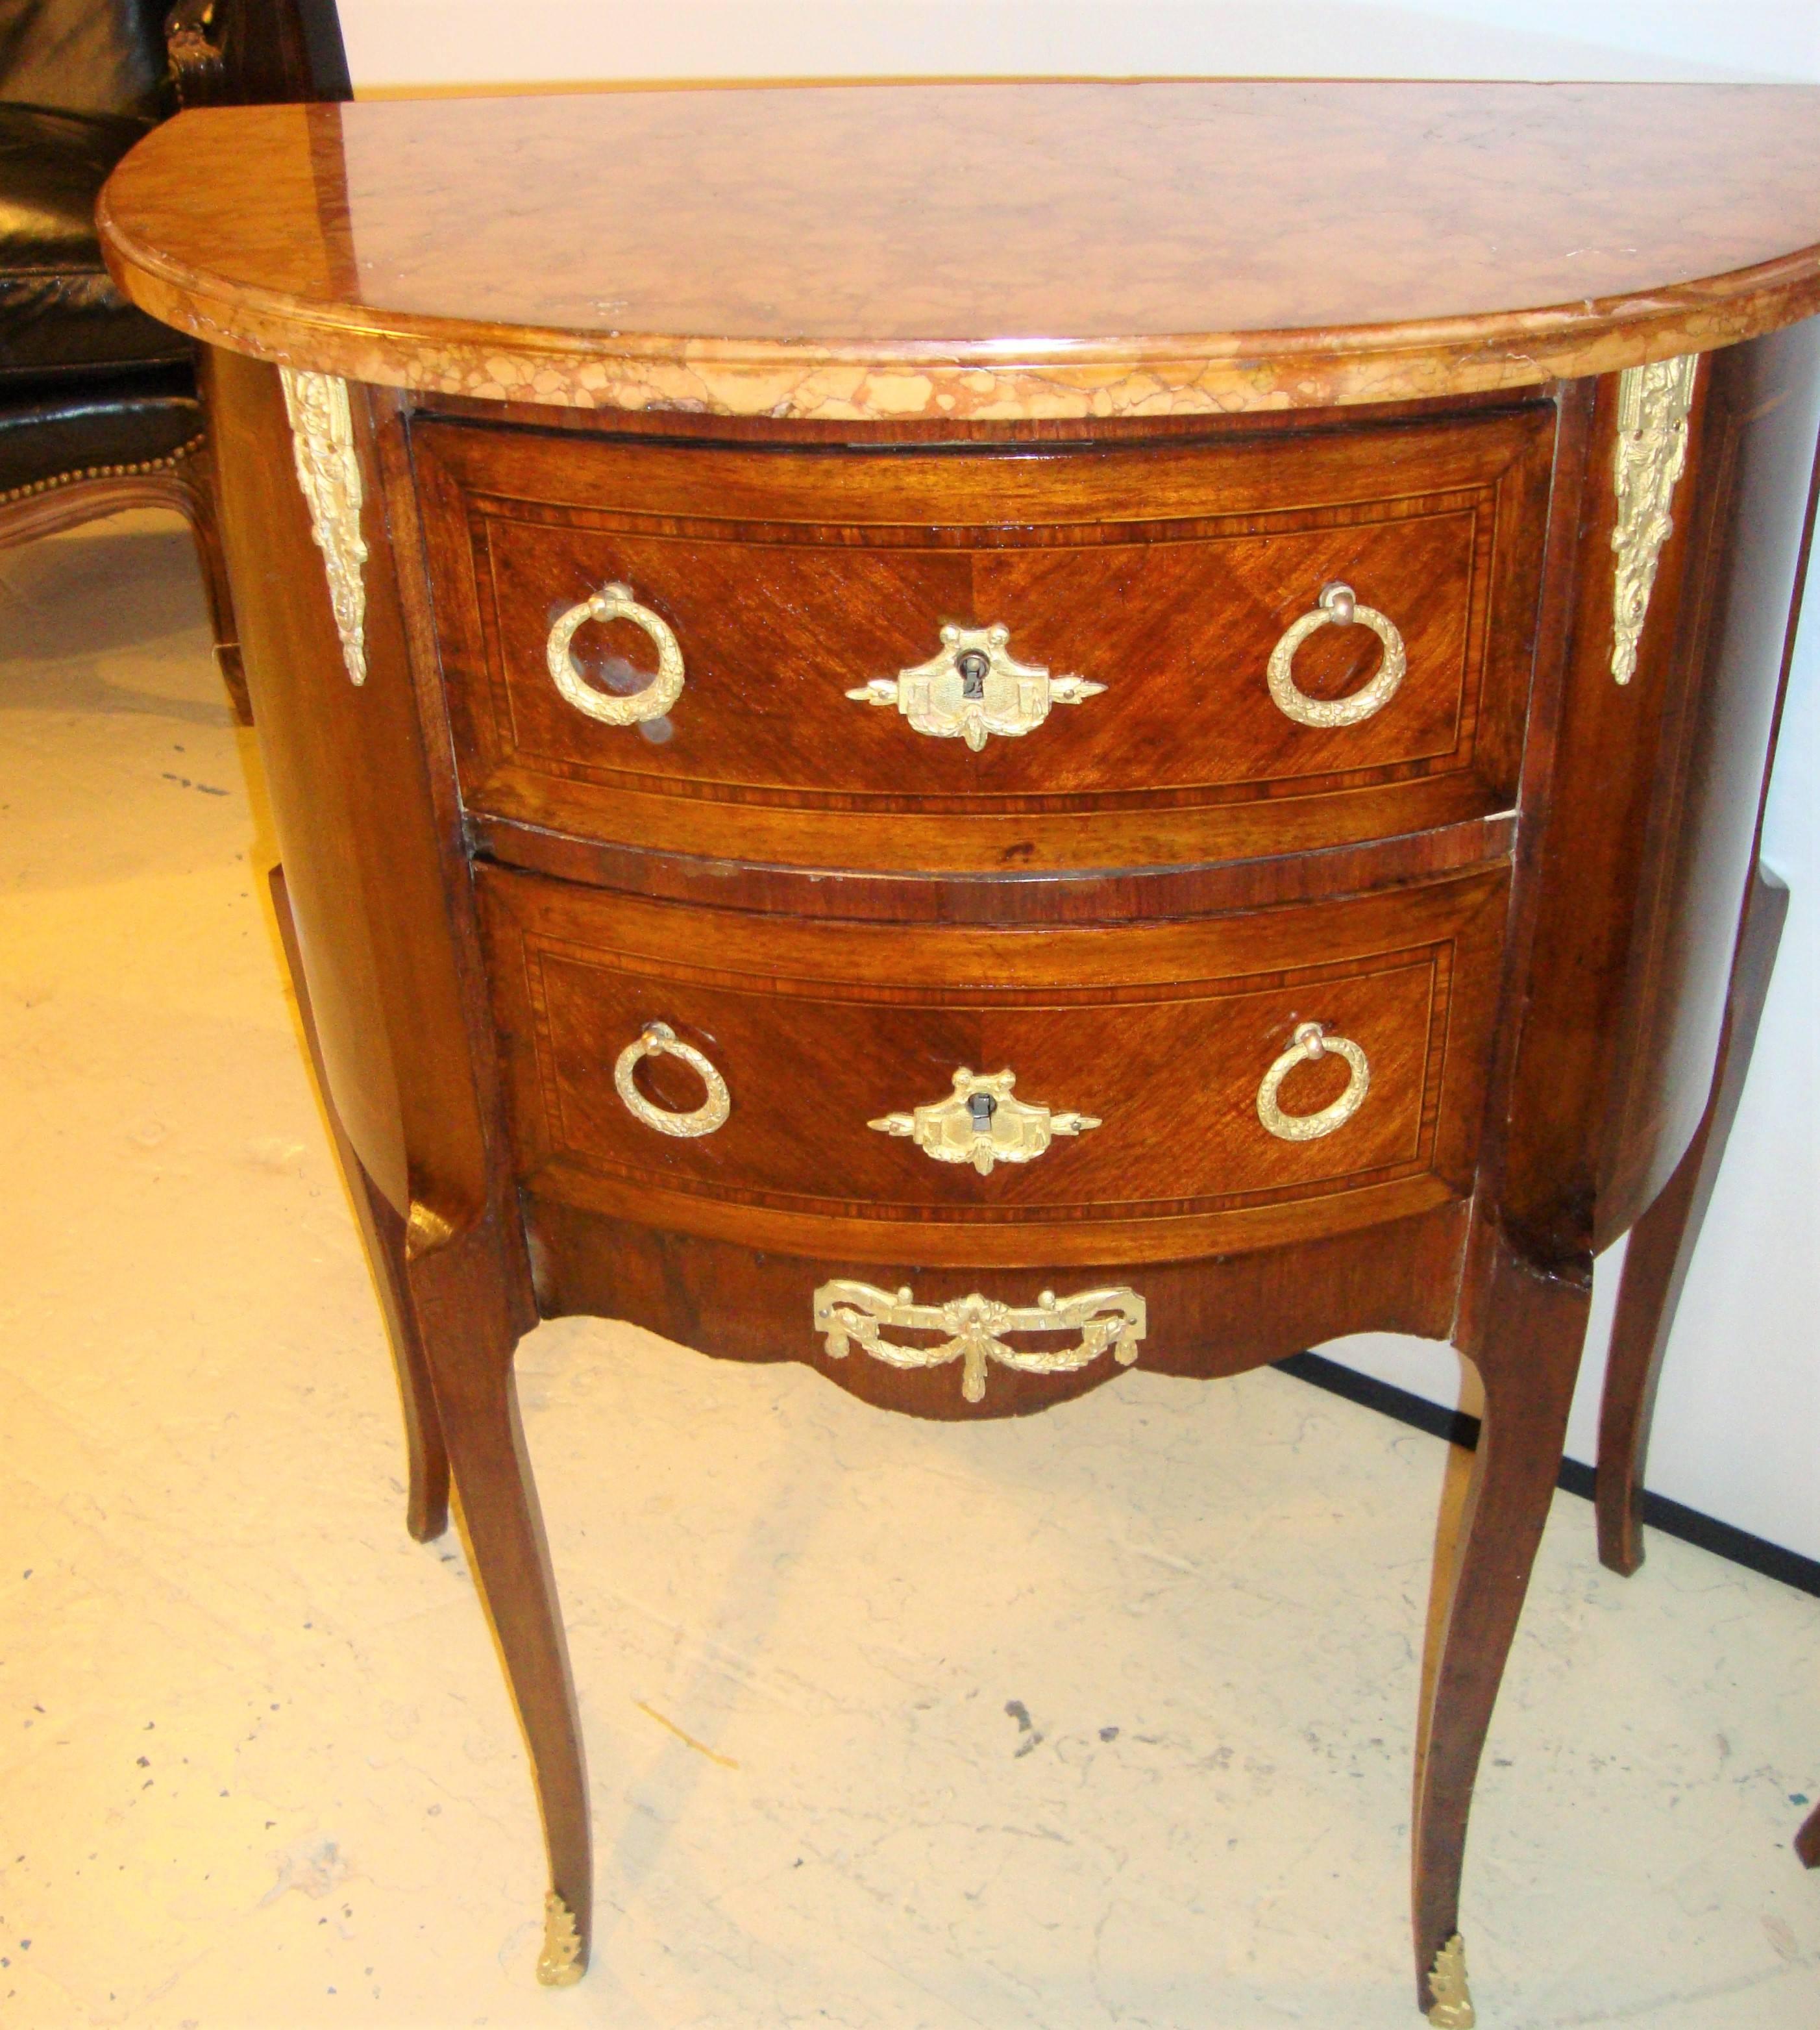 Pair of French demilune diminutive commodes or nightstands. Each recently French polished and cleaned. Finely inlaid supporting marble tops. Both stamped France.